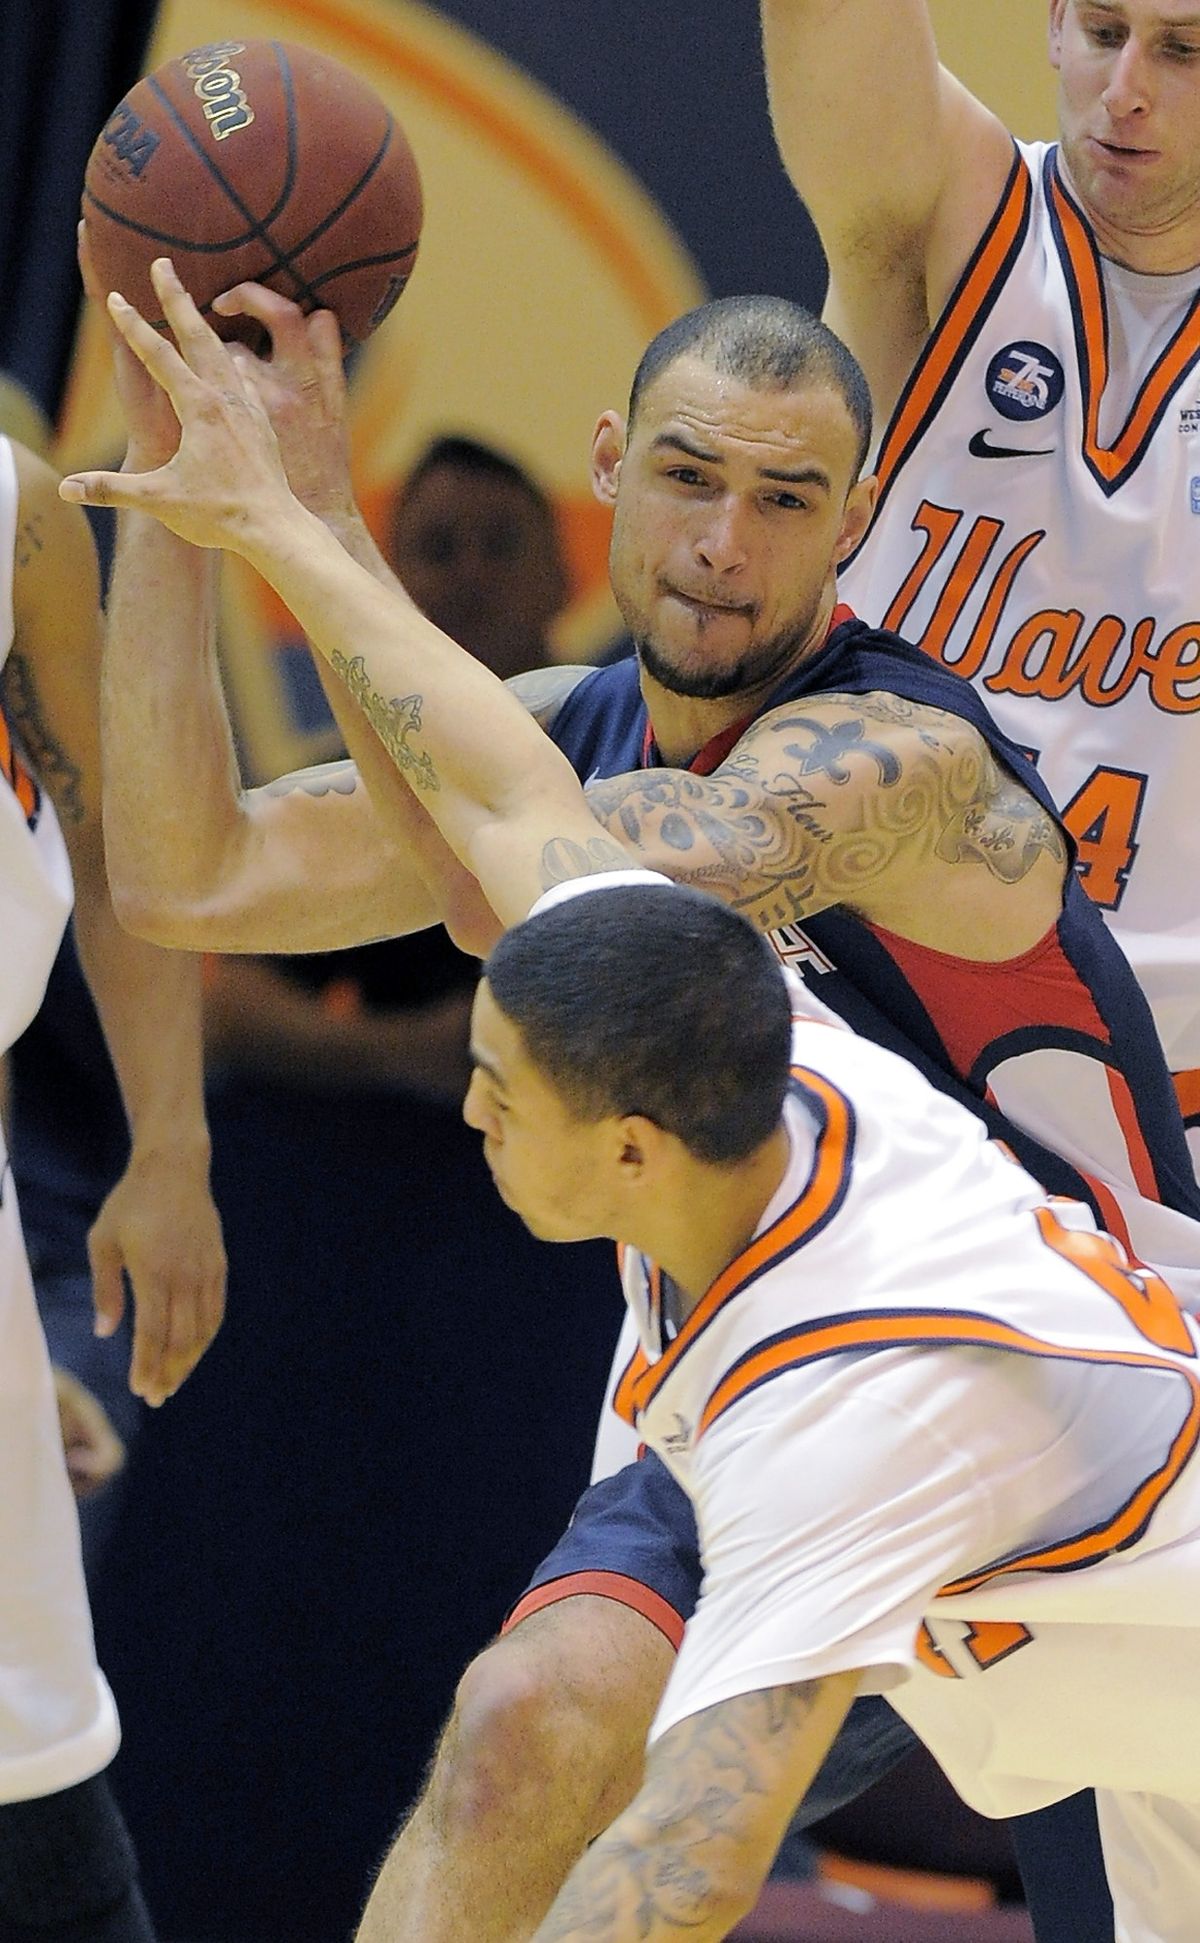 Gonzaga’s Robert Sacre shields the ball from Pepperdine Taylor Darby during Saturday’s game. (Associated Press)